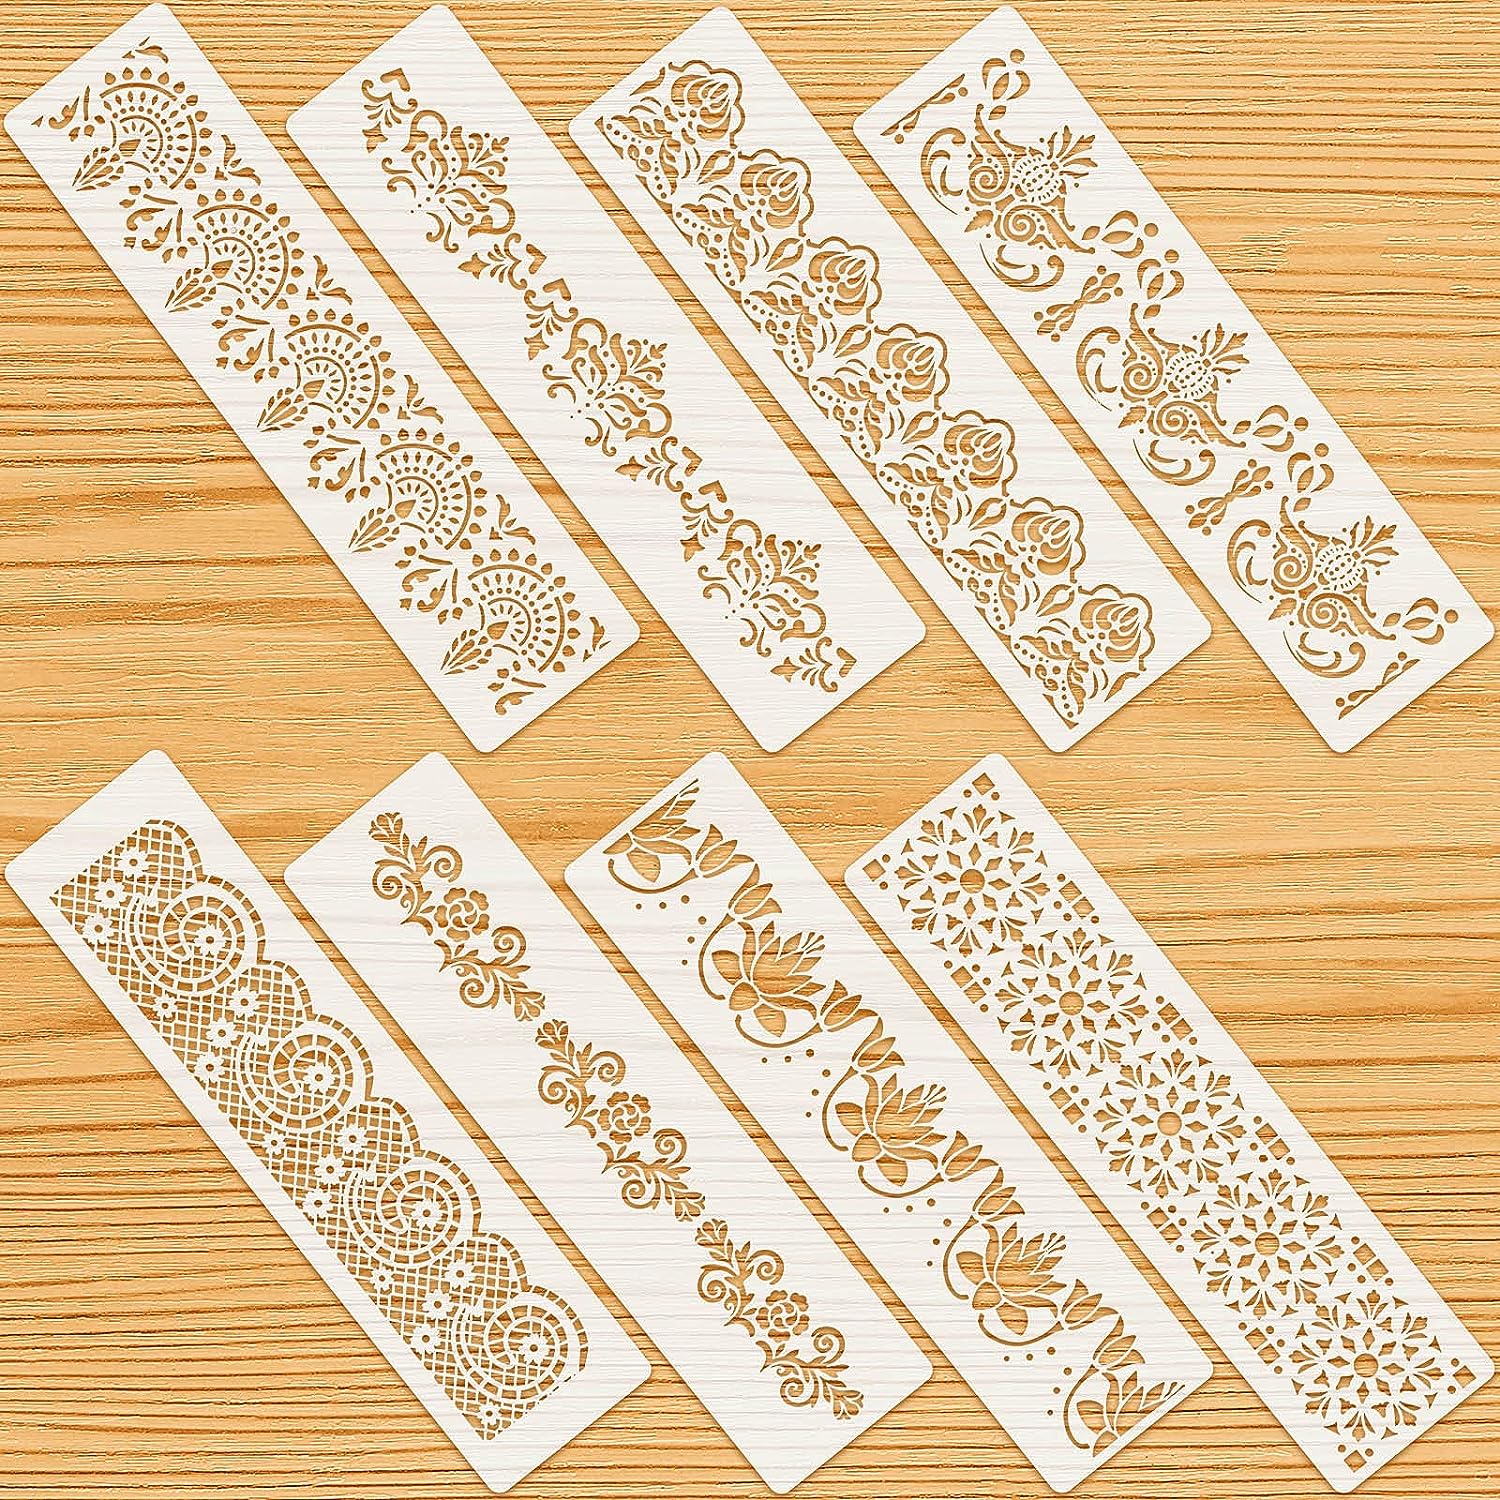 8 Pieces Ornate Border Stencil Flower Template DIY Art and Craft